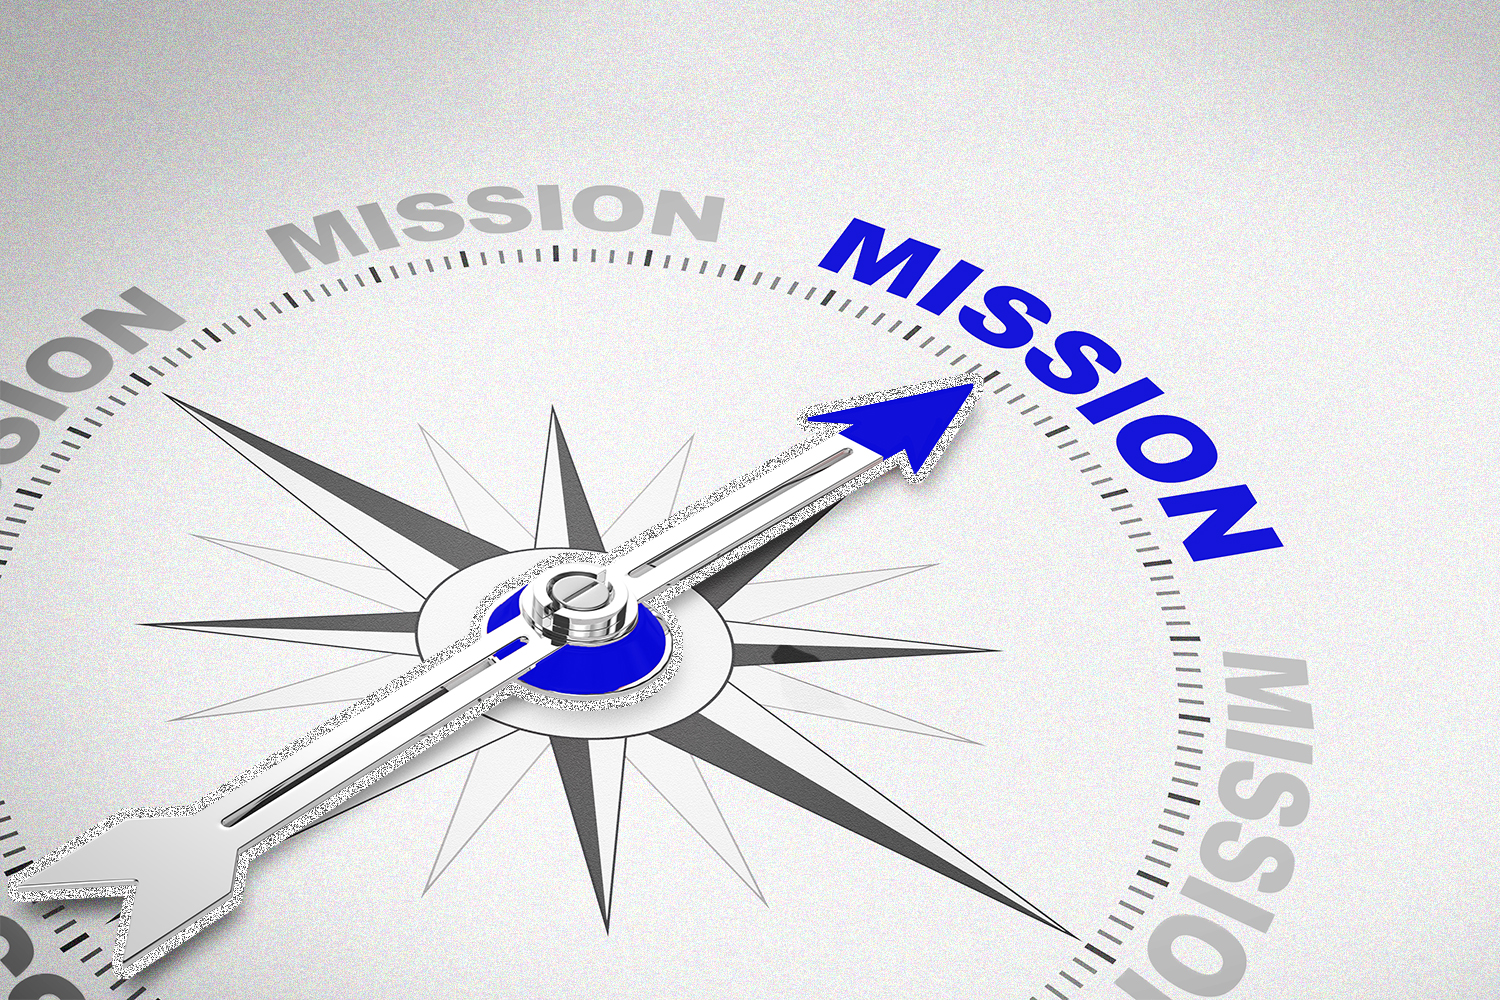 A compass with an arrow pointing to the word "mission"